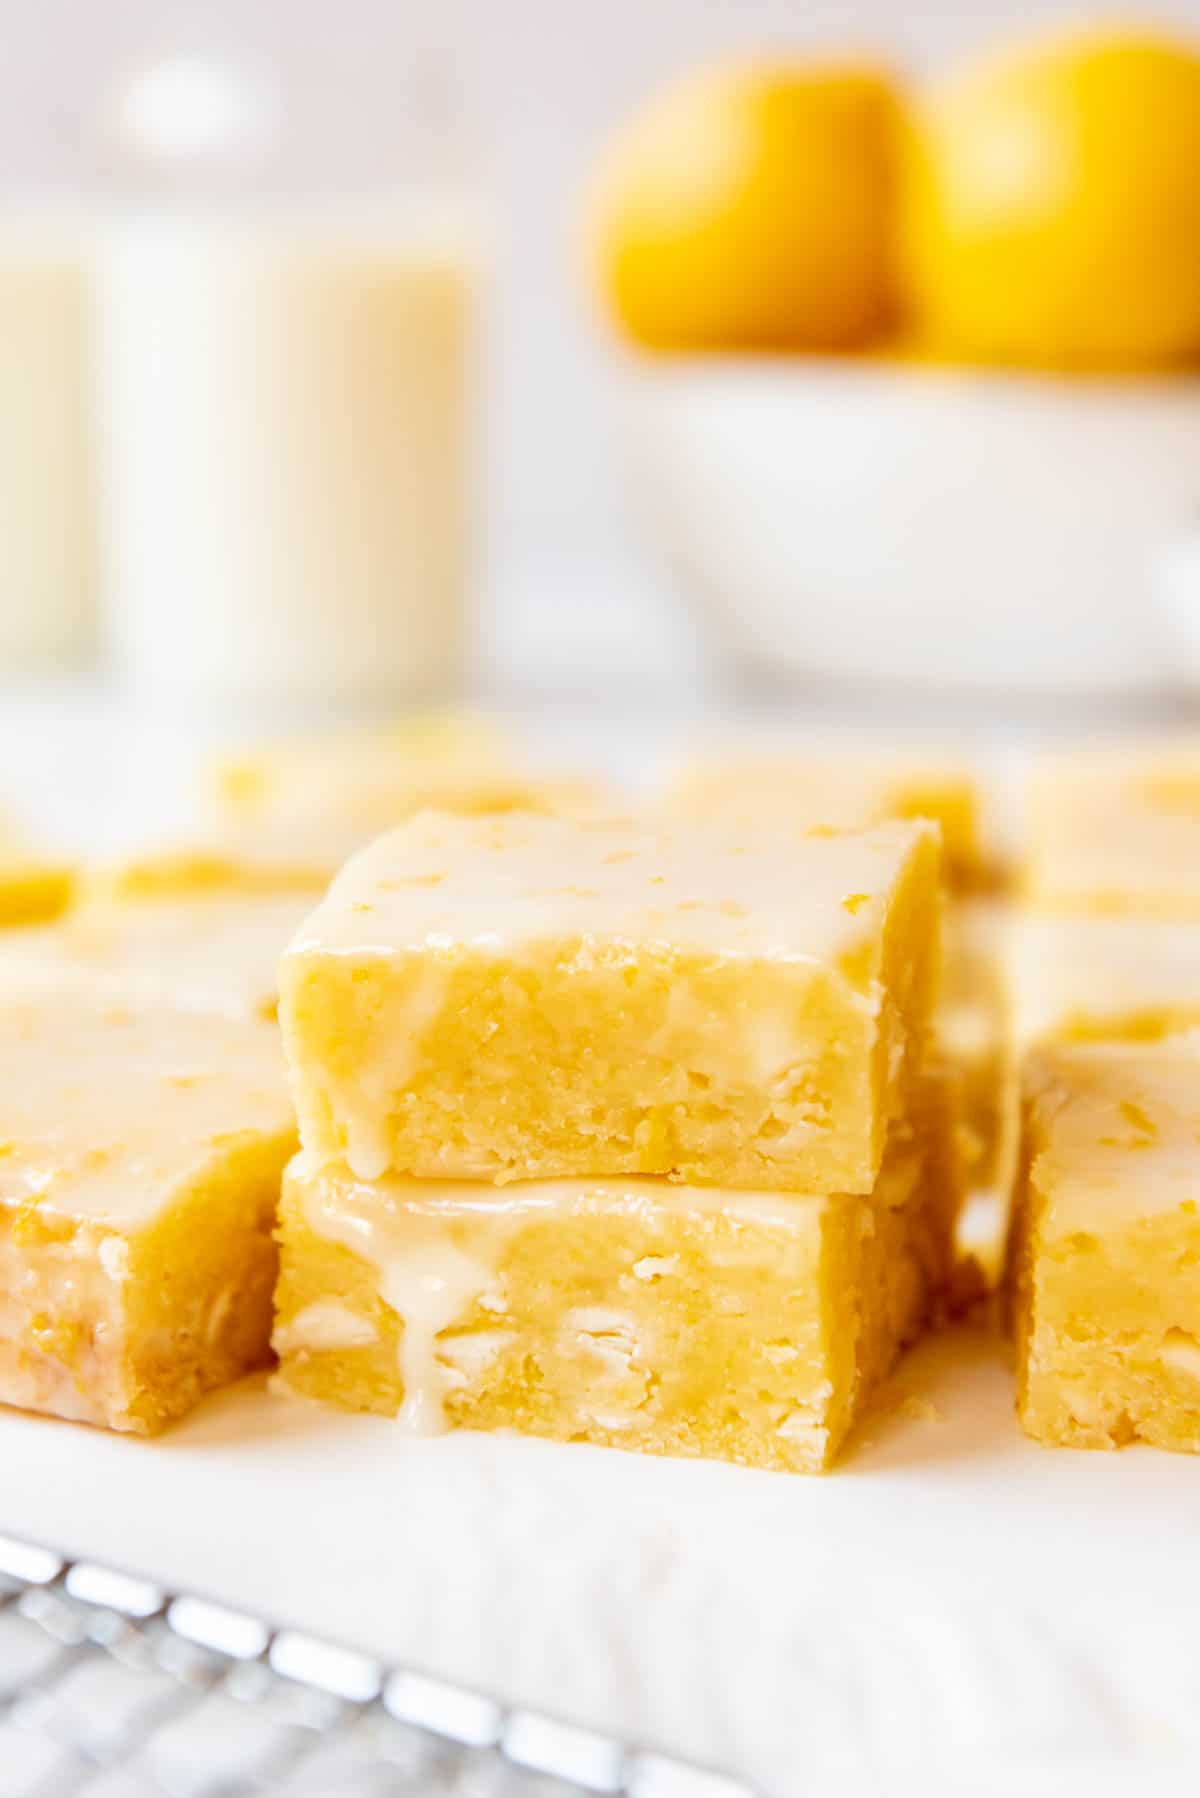 Stacked lemon brownies in front of a bowl of lemons and glasses of milk.